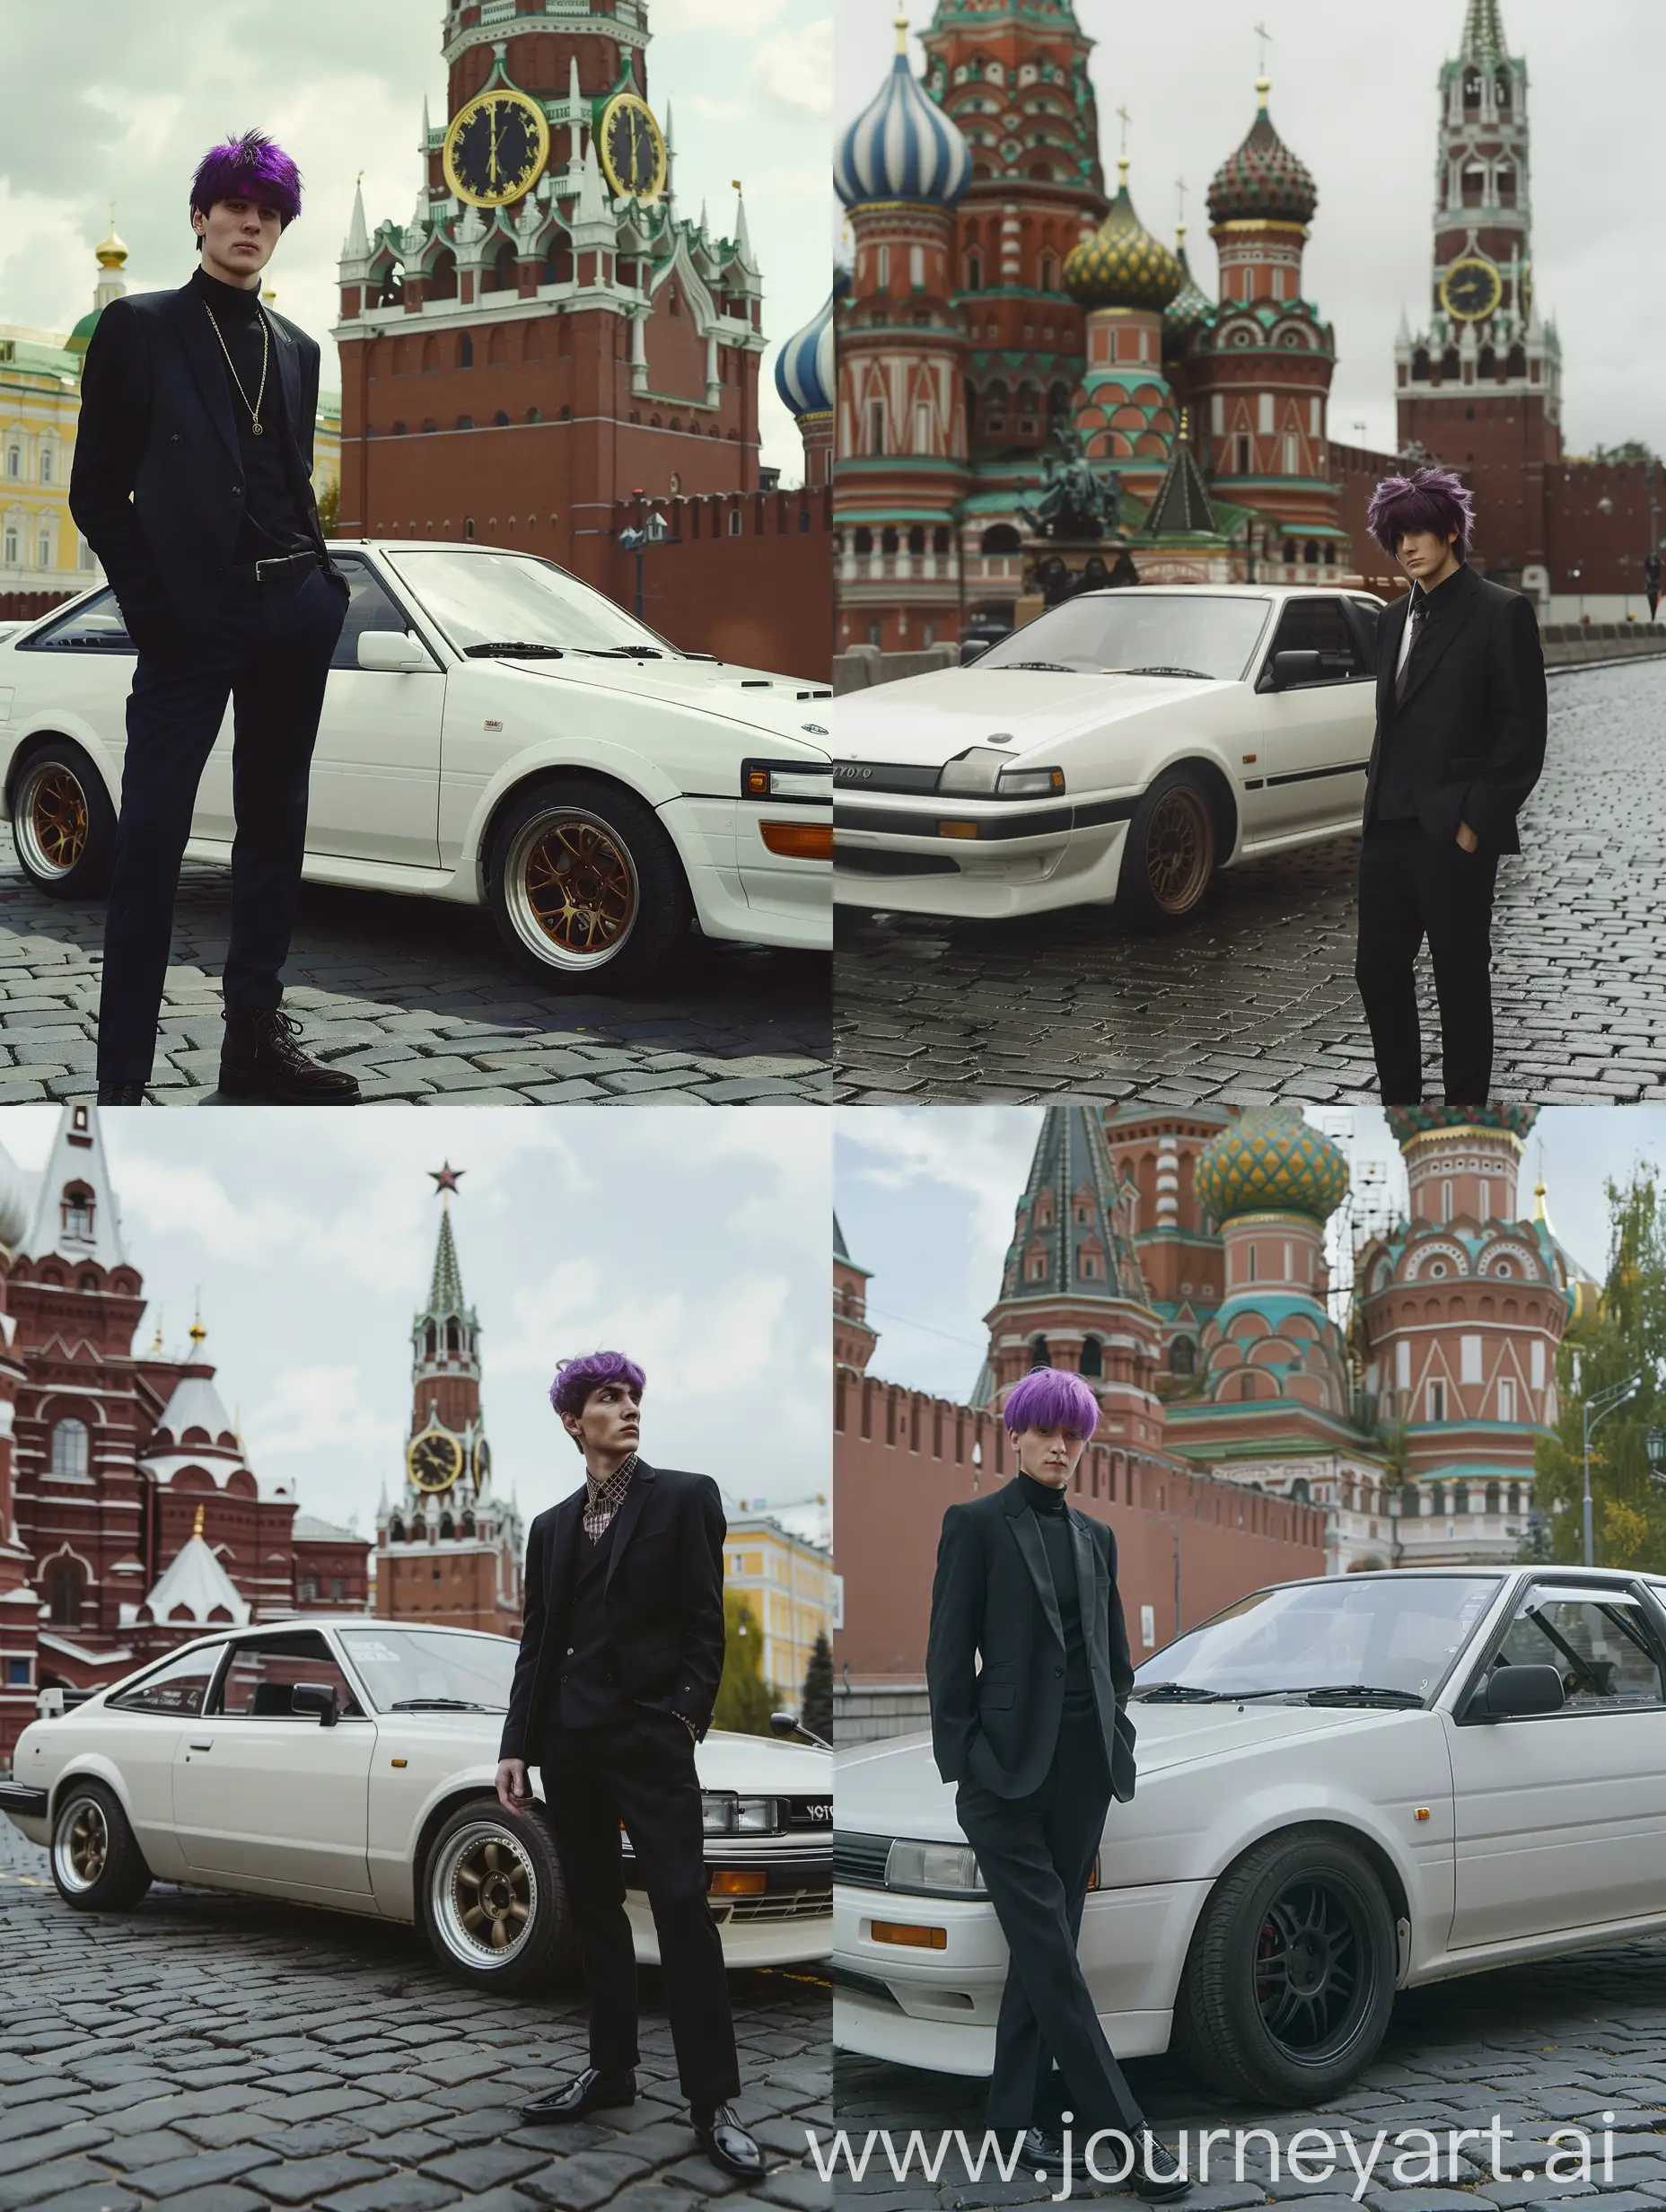 white male with purple hair is wearing a black suit, he is standing next to a white Toyota AE86, in the background is a Moscow in the 1950s